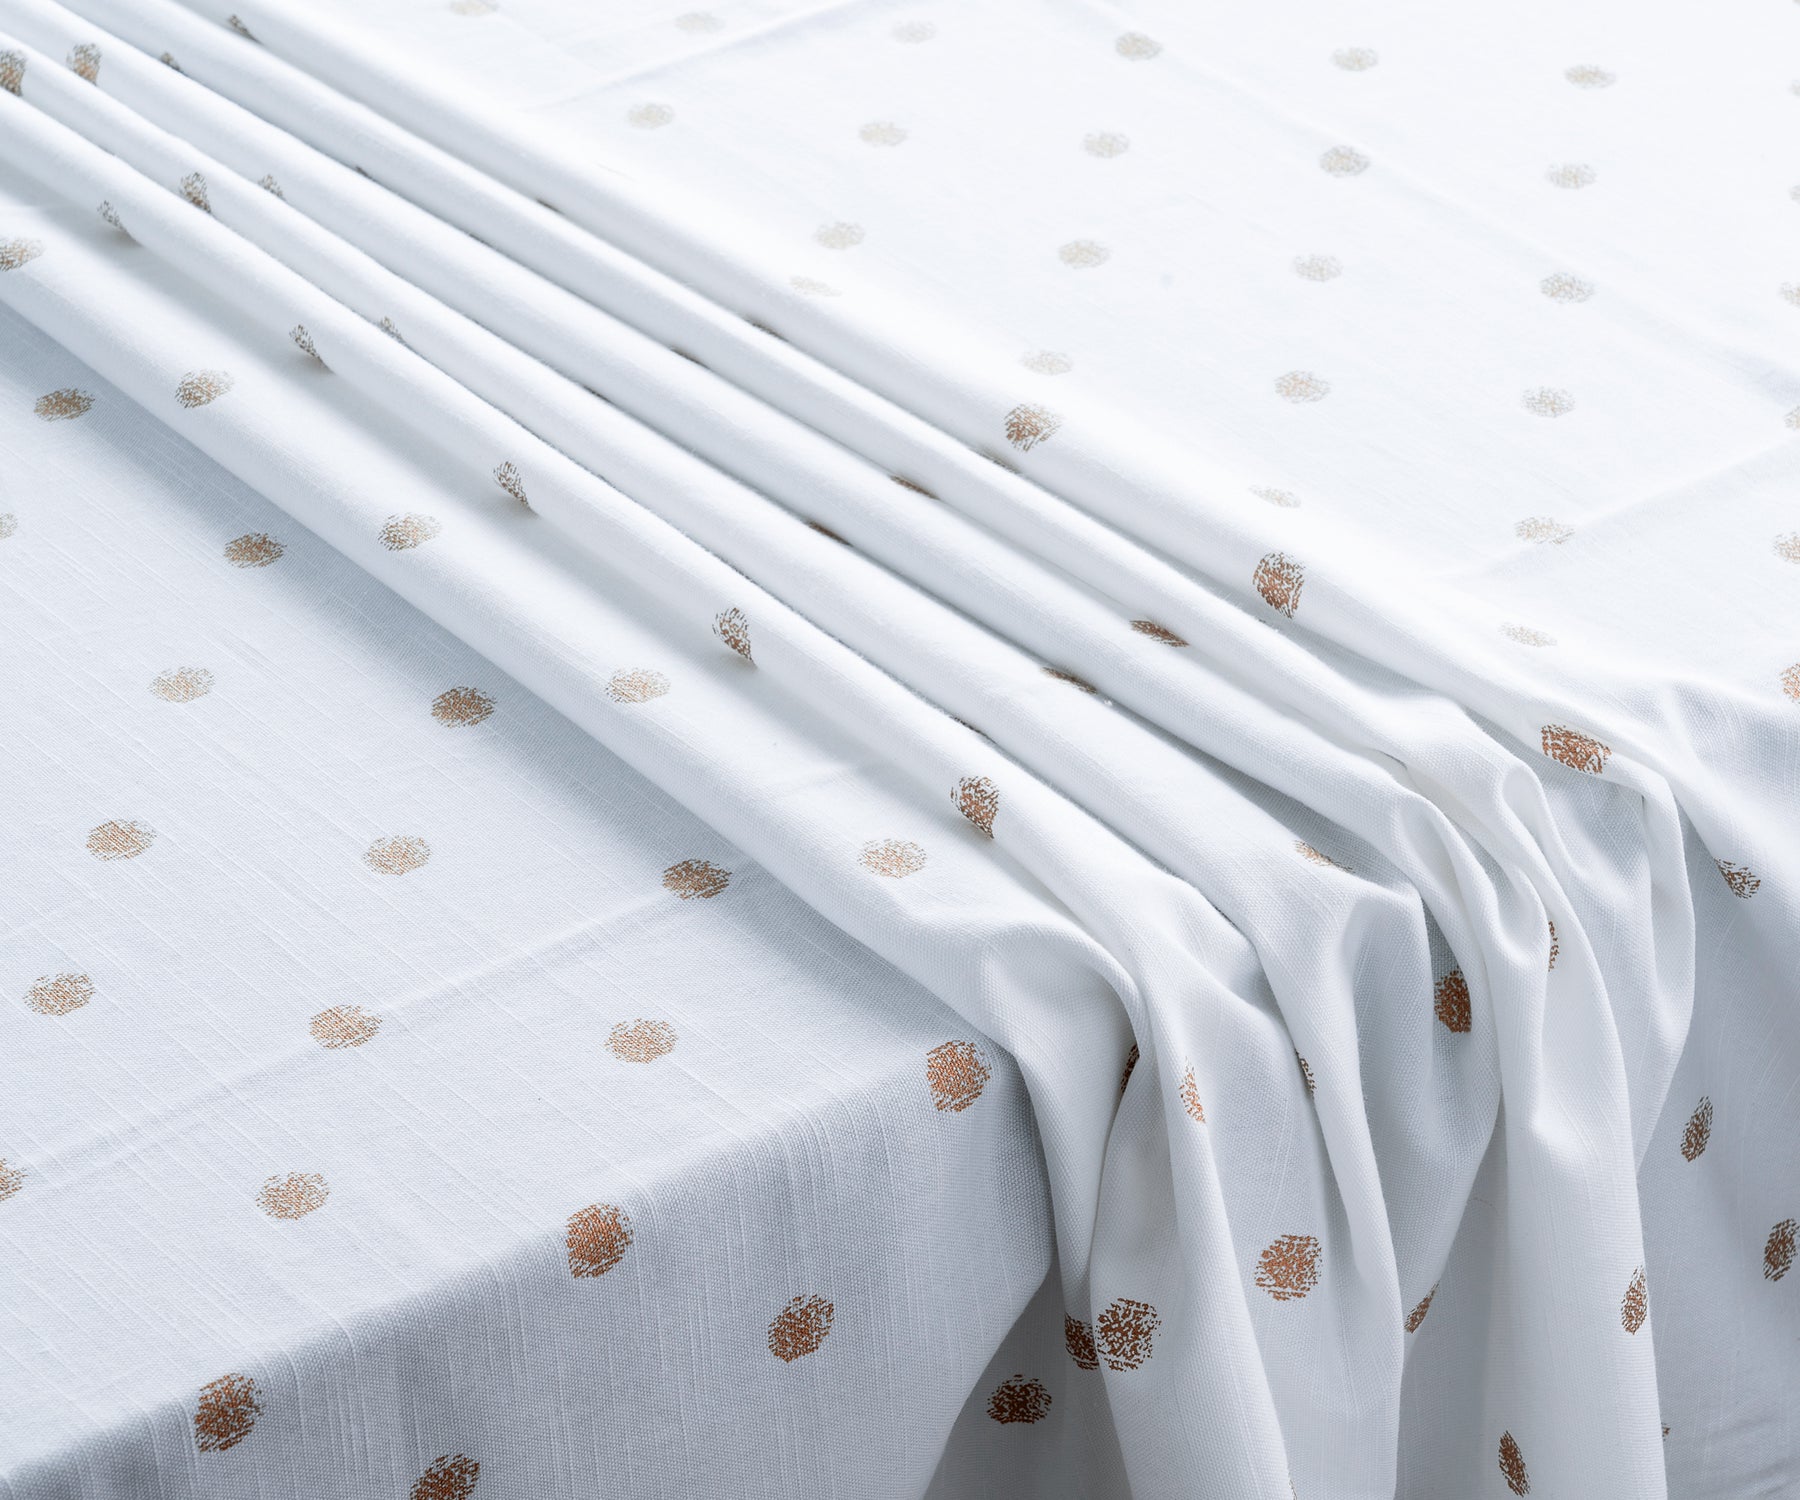 White cotton tablecloths, durable and elegant.